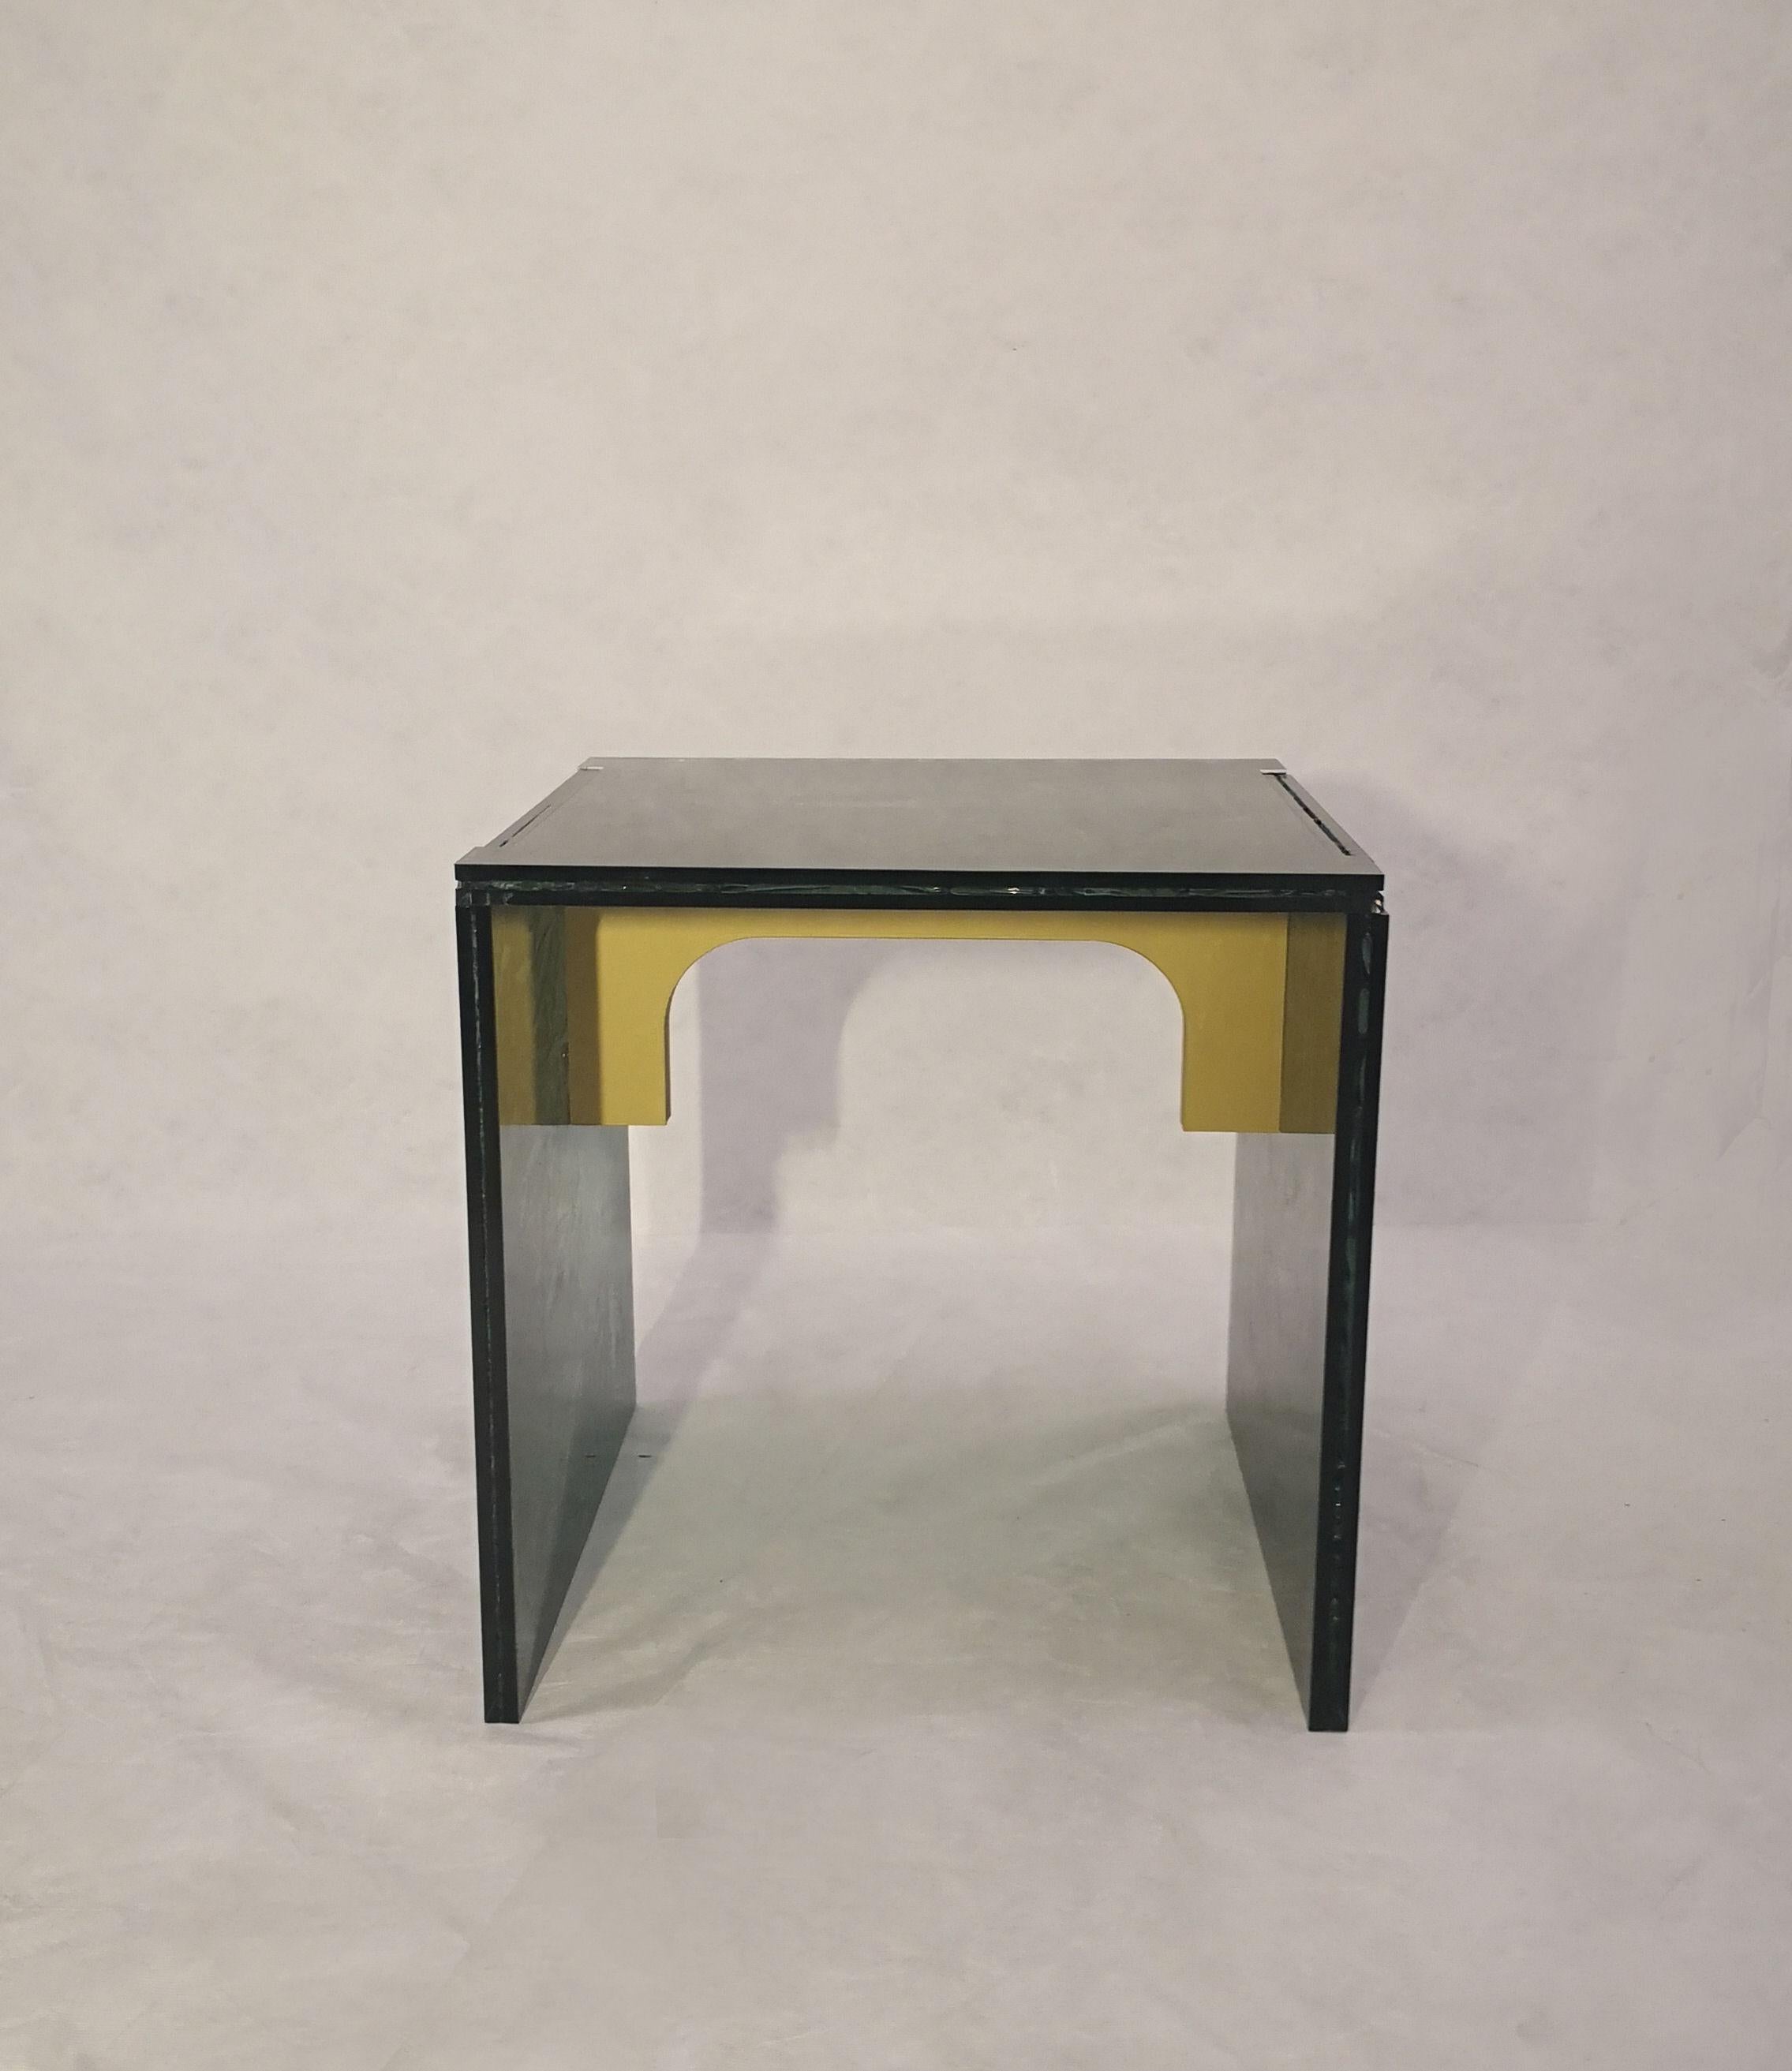 Italian Sketch Quadro Side Table 1 Made of Green Moss Acrylic Des, Roberto Giacomucci For Sale